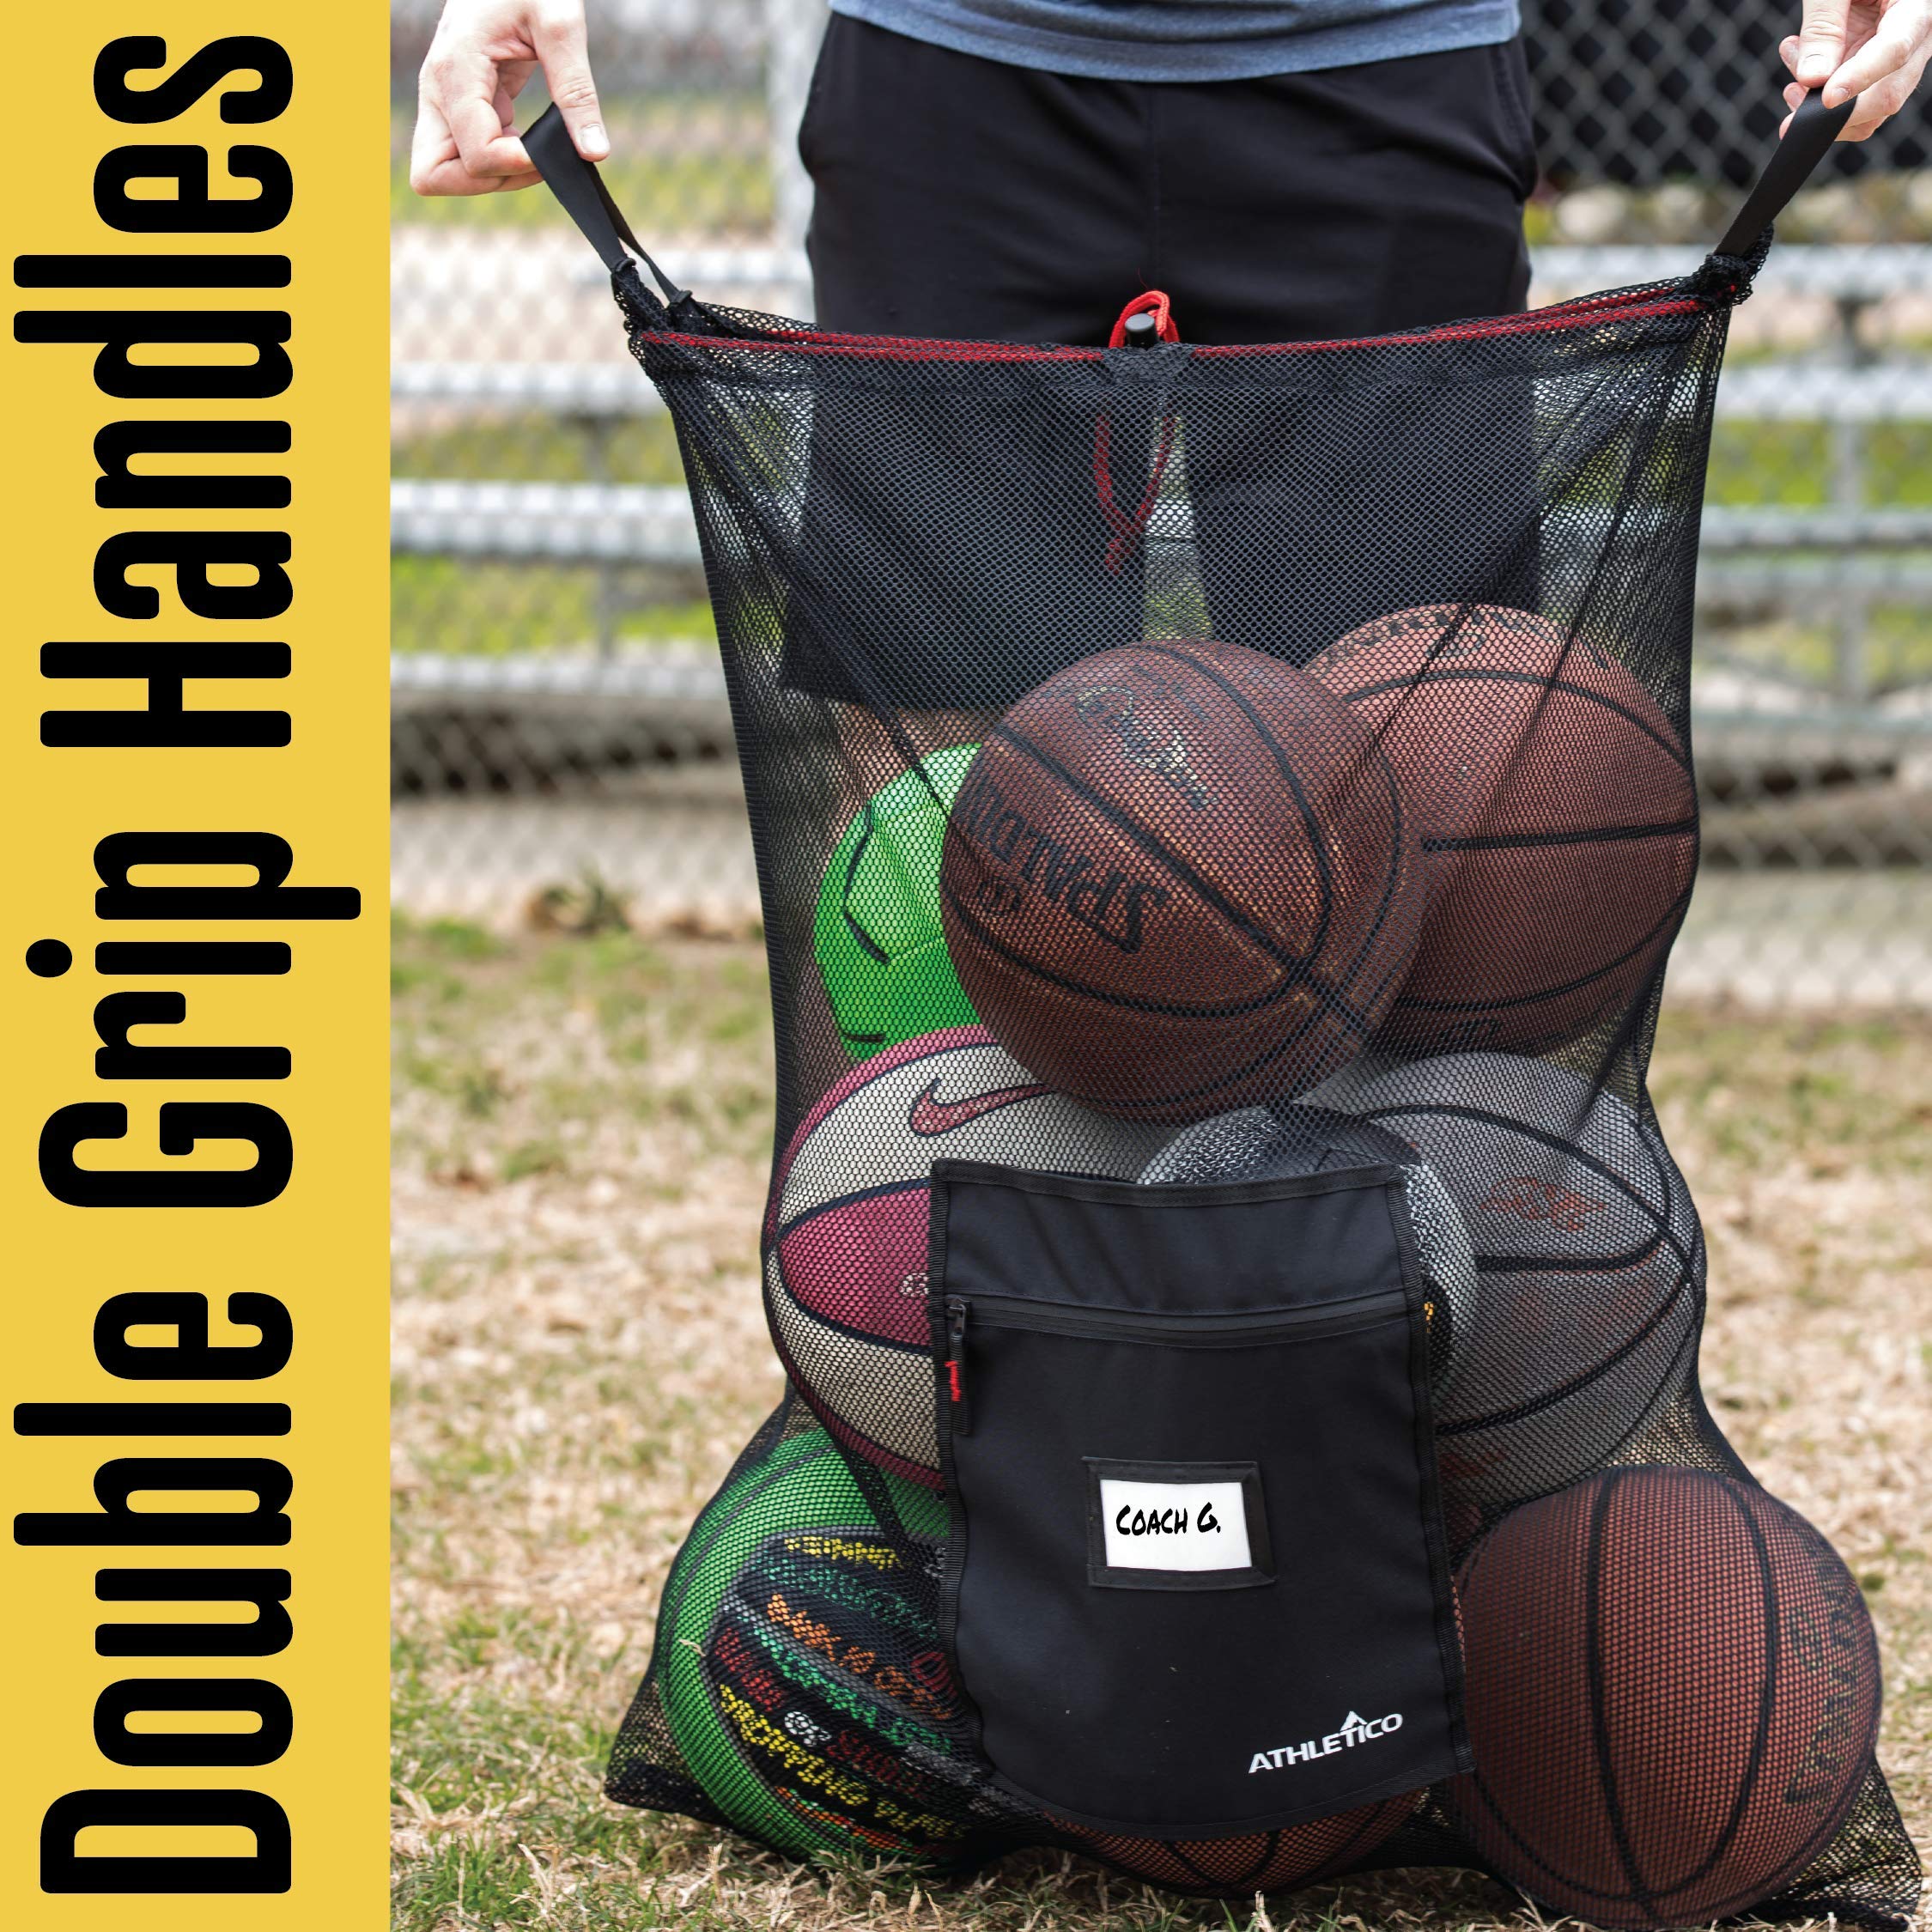 Athletico Extra Large Ball Bag - Mesh Soccer Ball Bag - Heavy Duty Drawstring Bags Hold Equipment For Sports Including Basketball, Volleyball, Baseball, Swimming Gear or The Beach